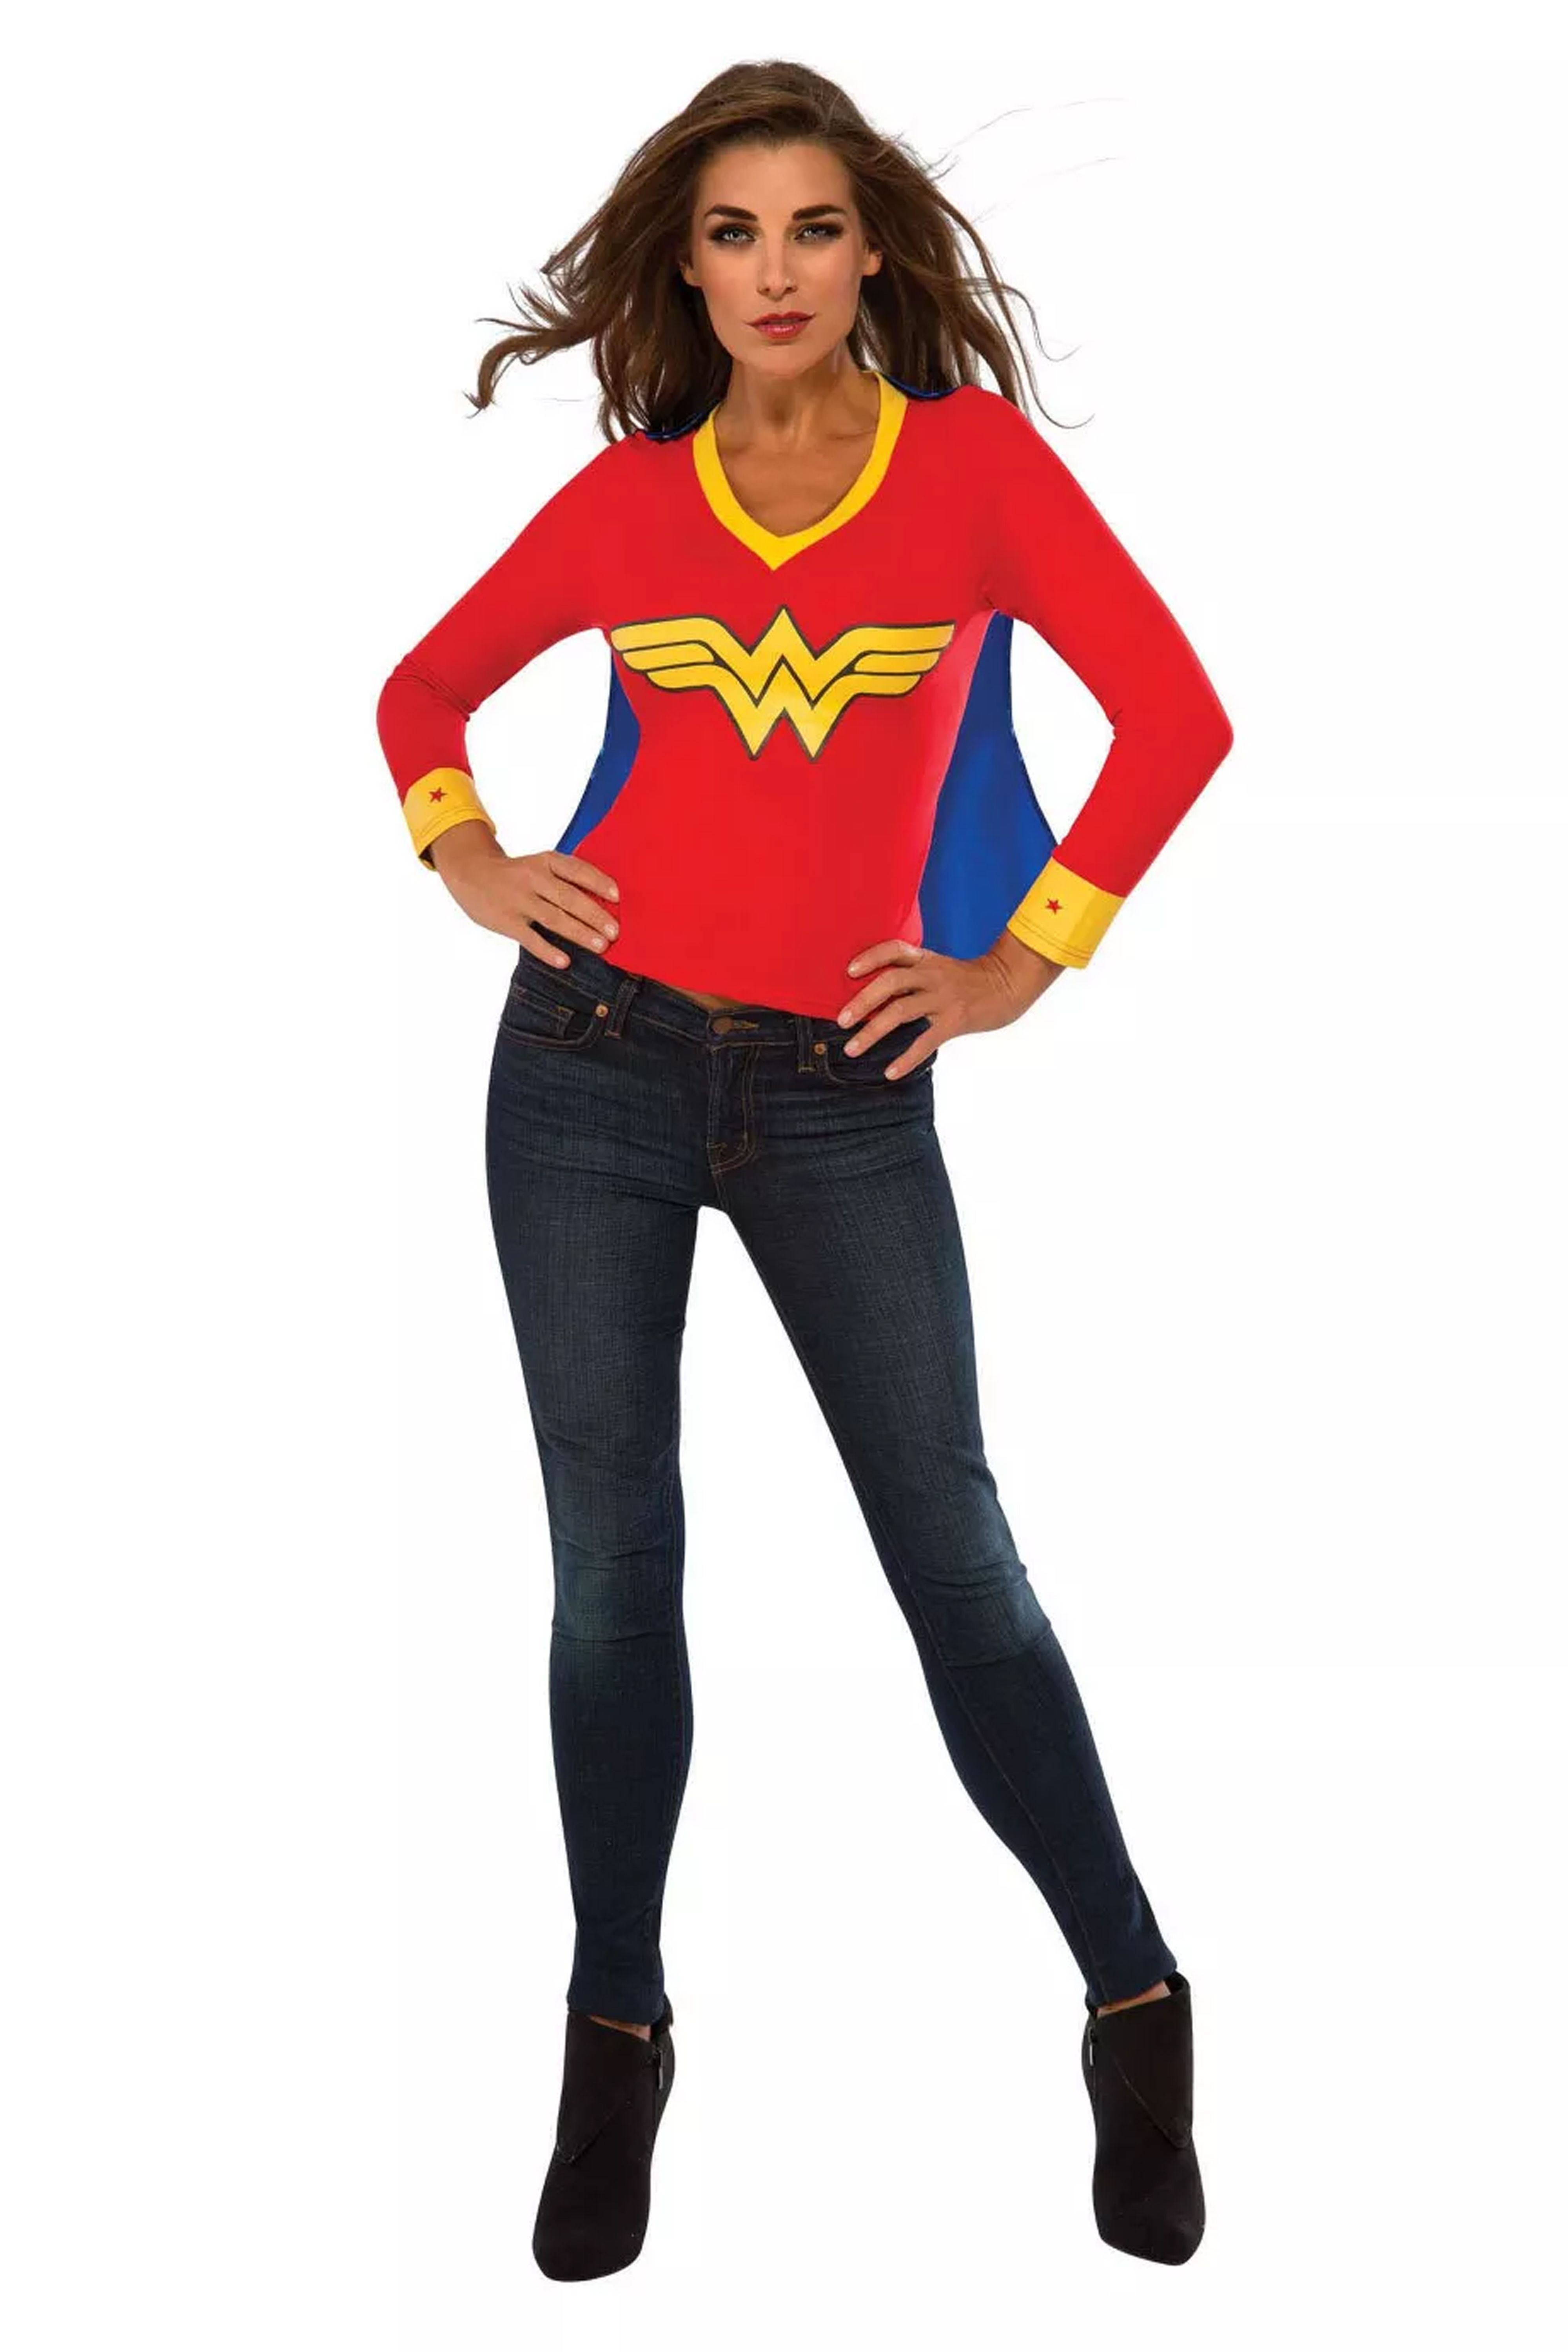 Prove You\'re a Superhero to Your Coworkers.